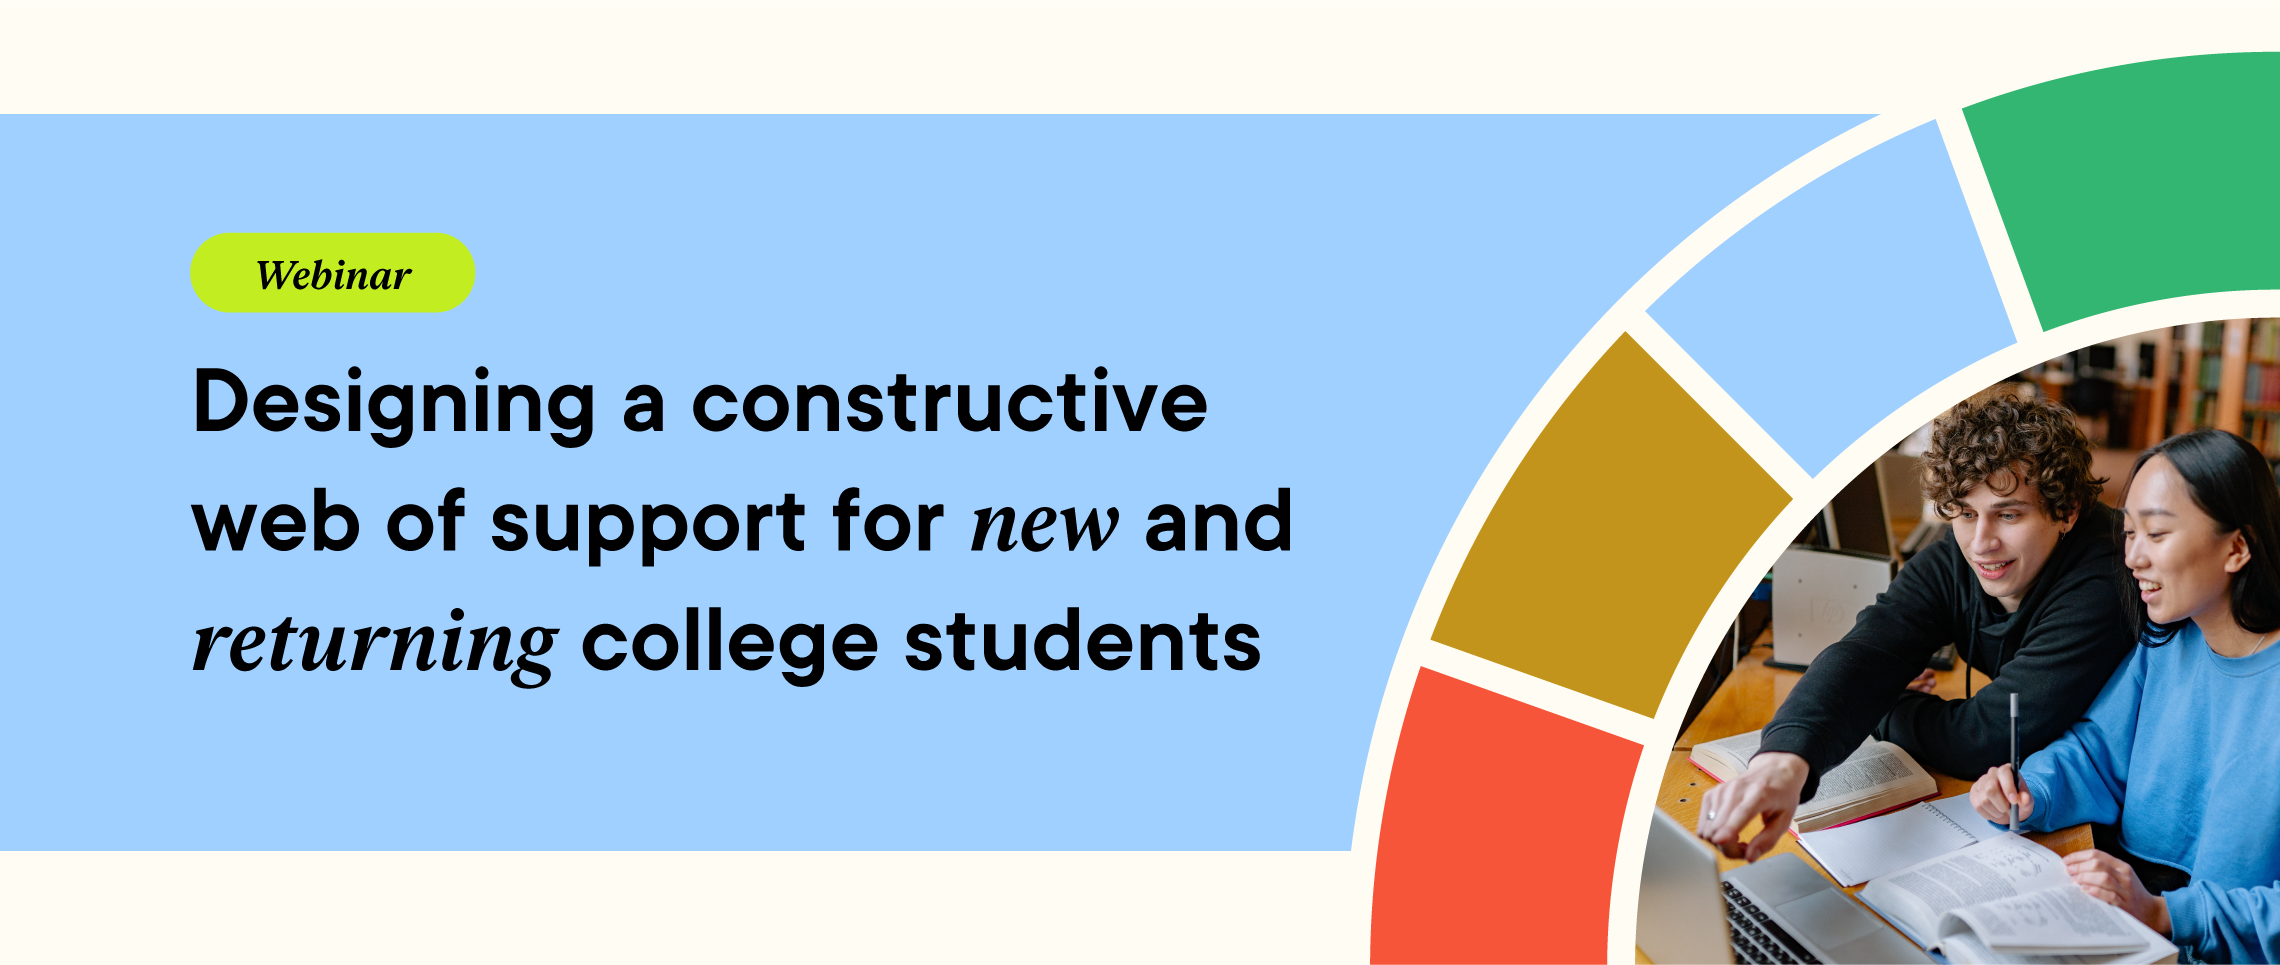 Webinar. Designing a constructive web of support for new and returning college students